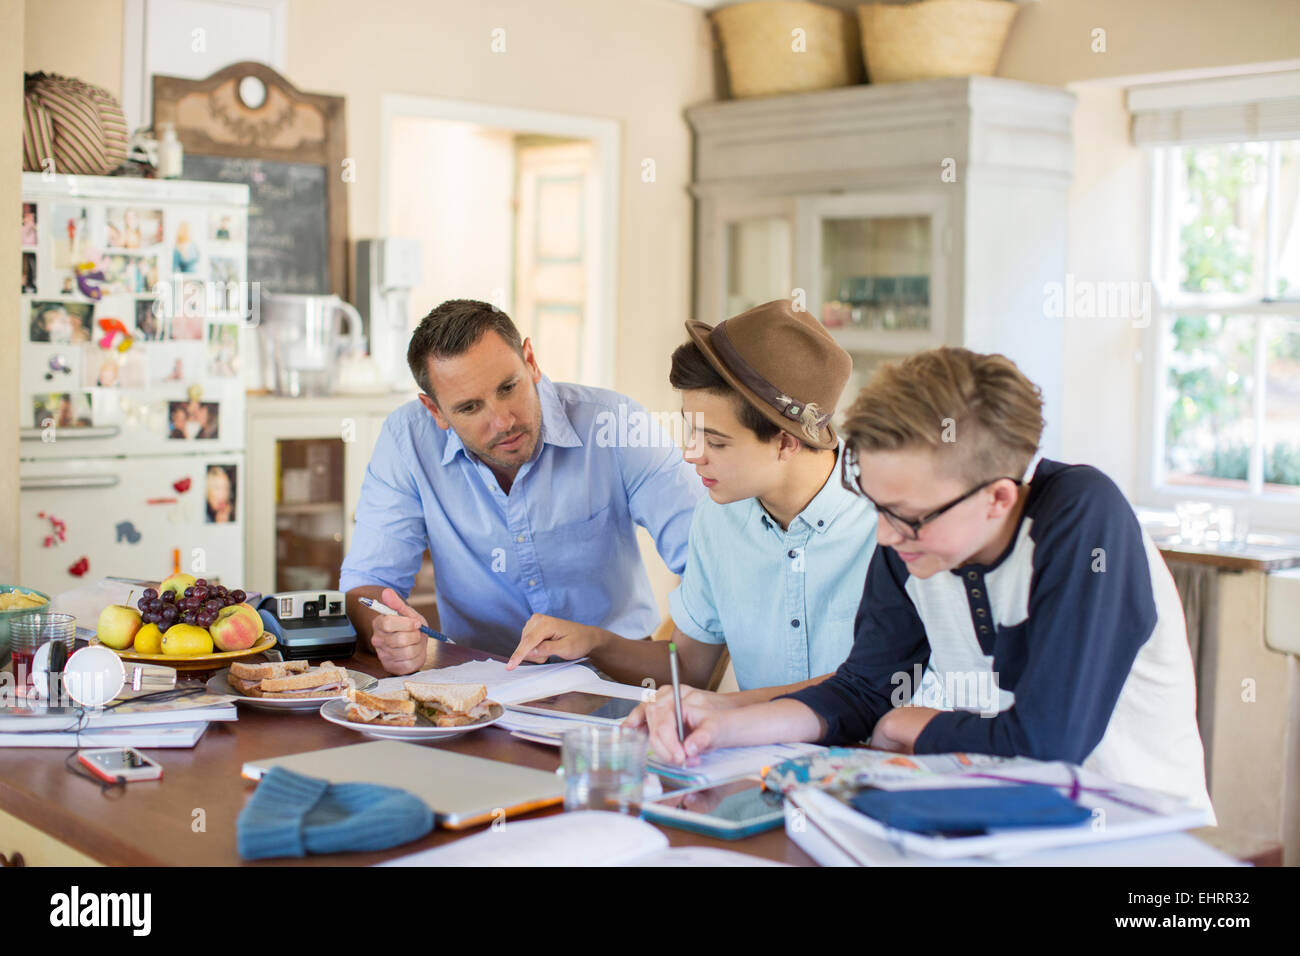 Mid adult man helping teenage boys with their homework at table Stock Photo